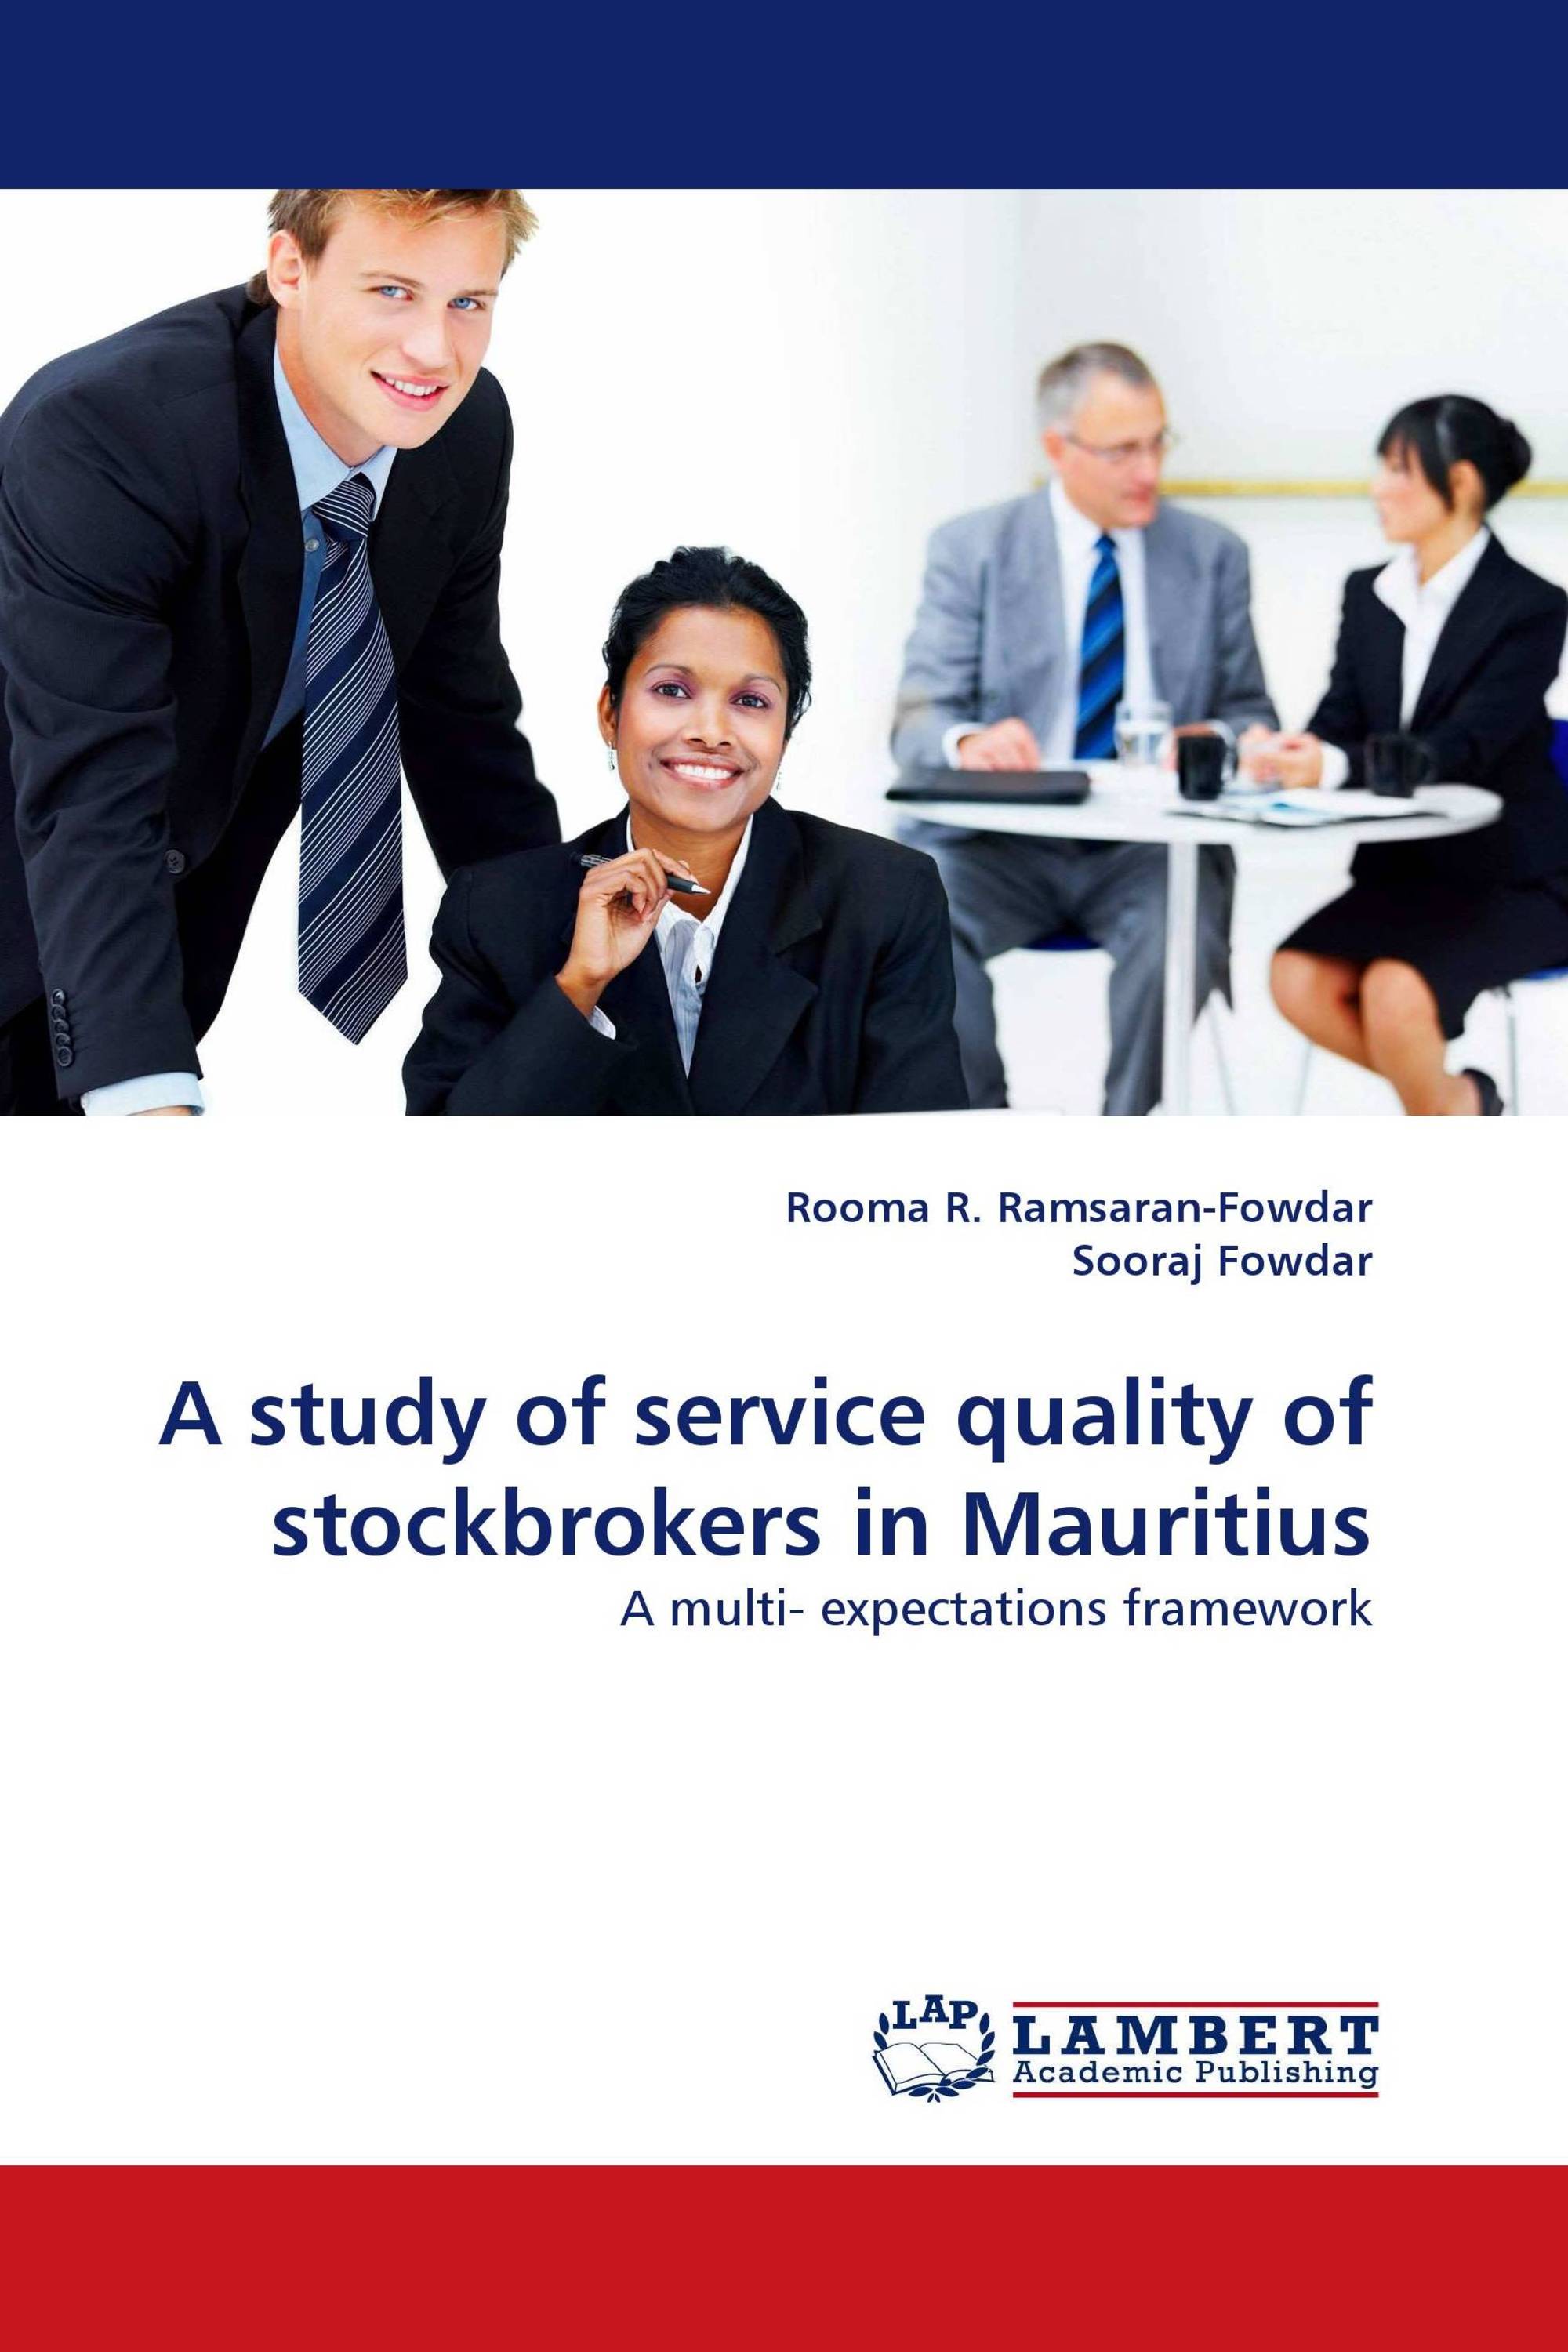 A study of service quality of stockbrokers in Mauritius